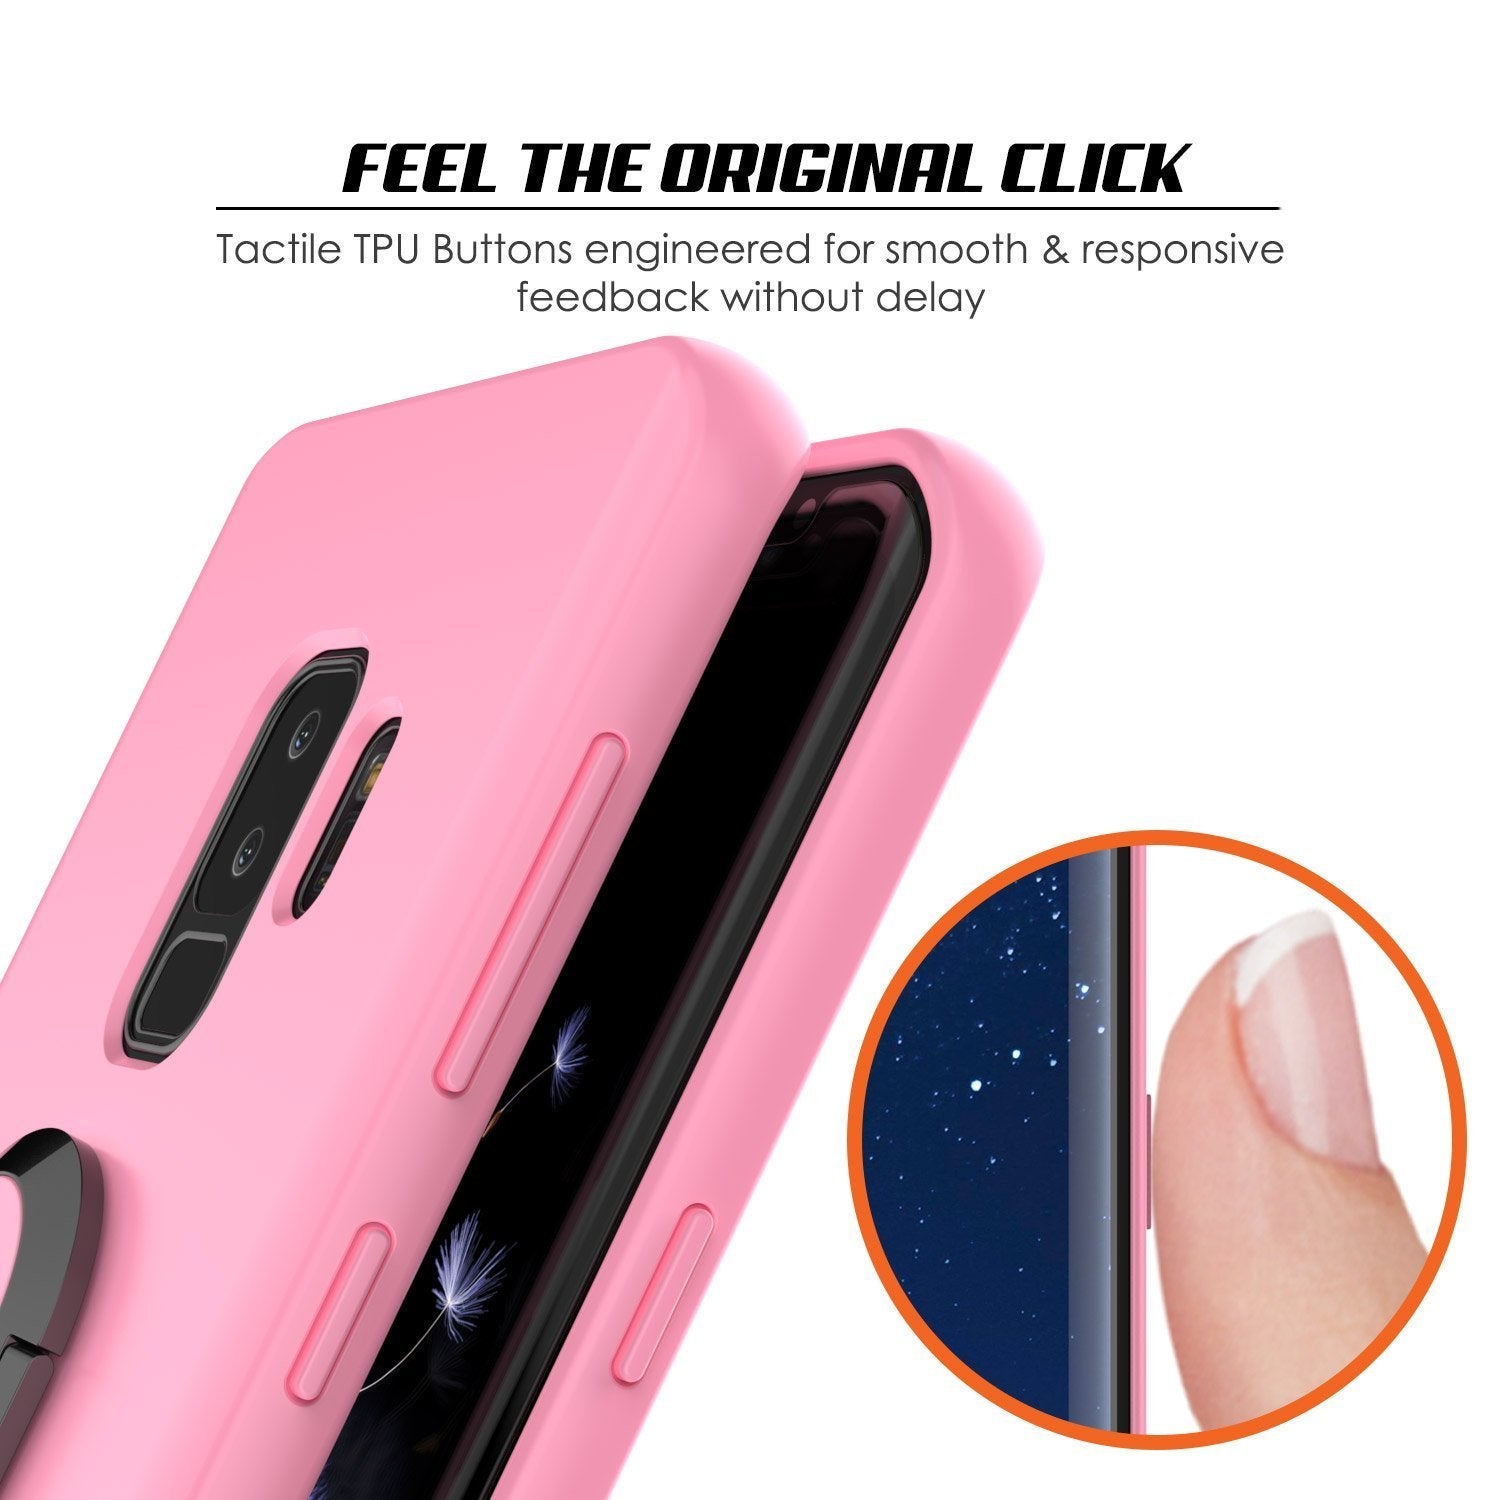 Galaxy S9 PLUS, Punkcase Magnetix Protective TPU Cover W/ Kickstand, Ring Grip Holder & Metal Plate for Magnetic Car Phone Mount PLUS PunkShield Screen Protector for Samsung S9+ Edge [Pink]